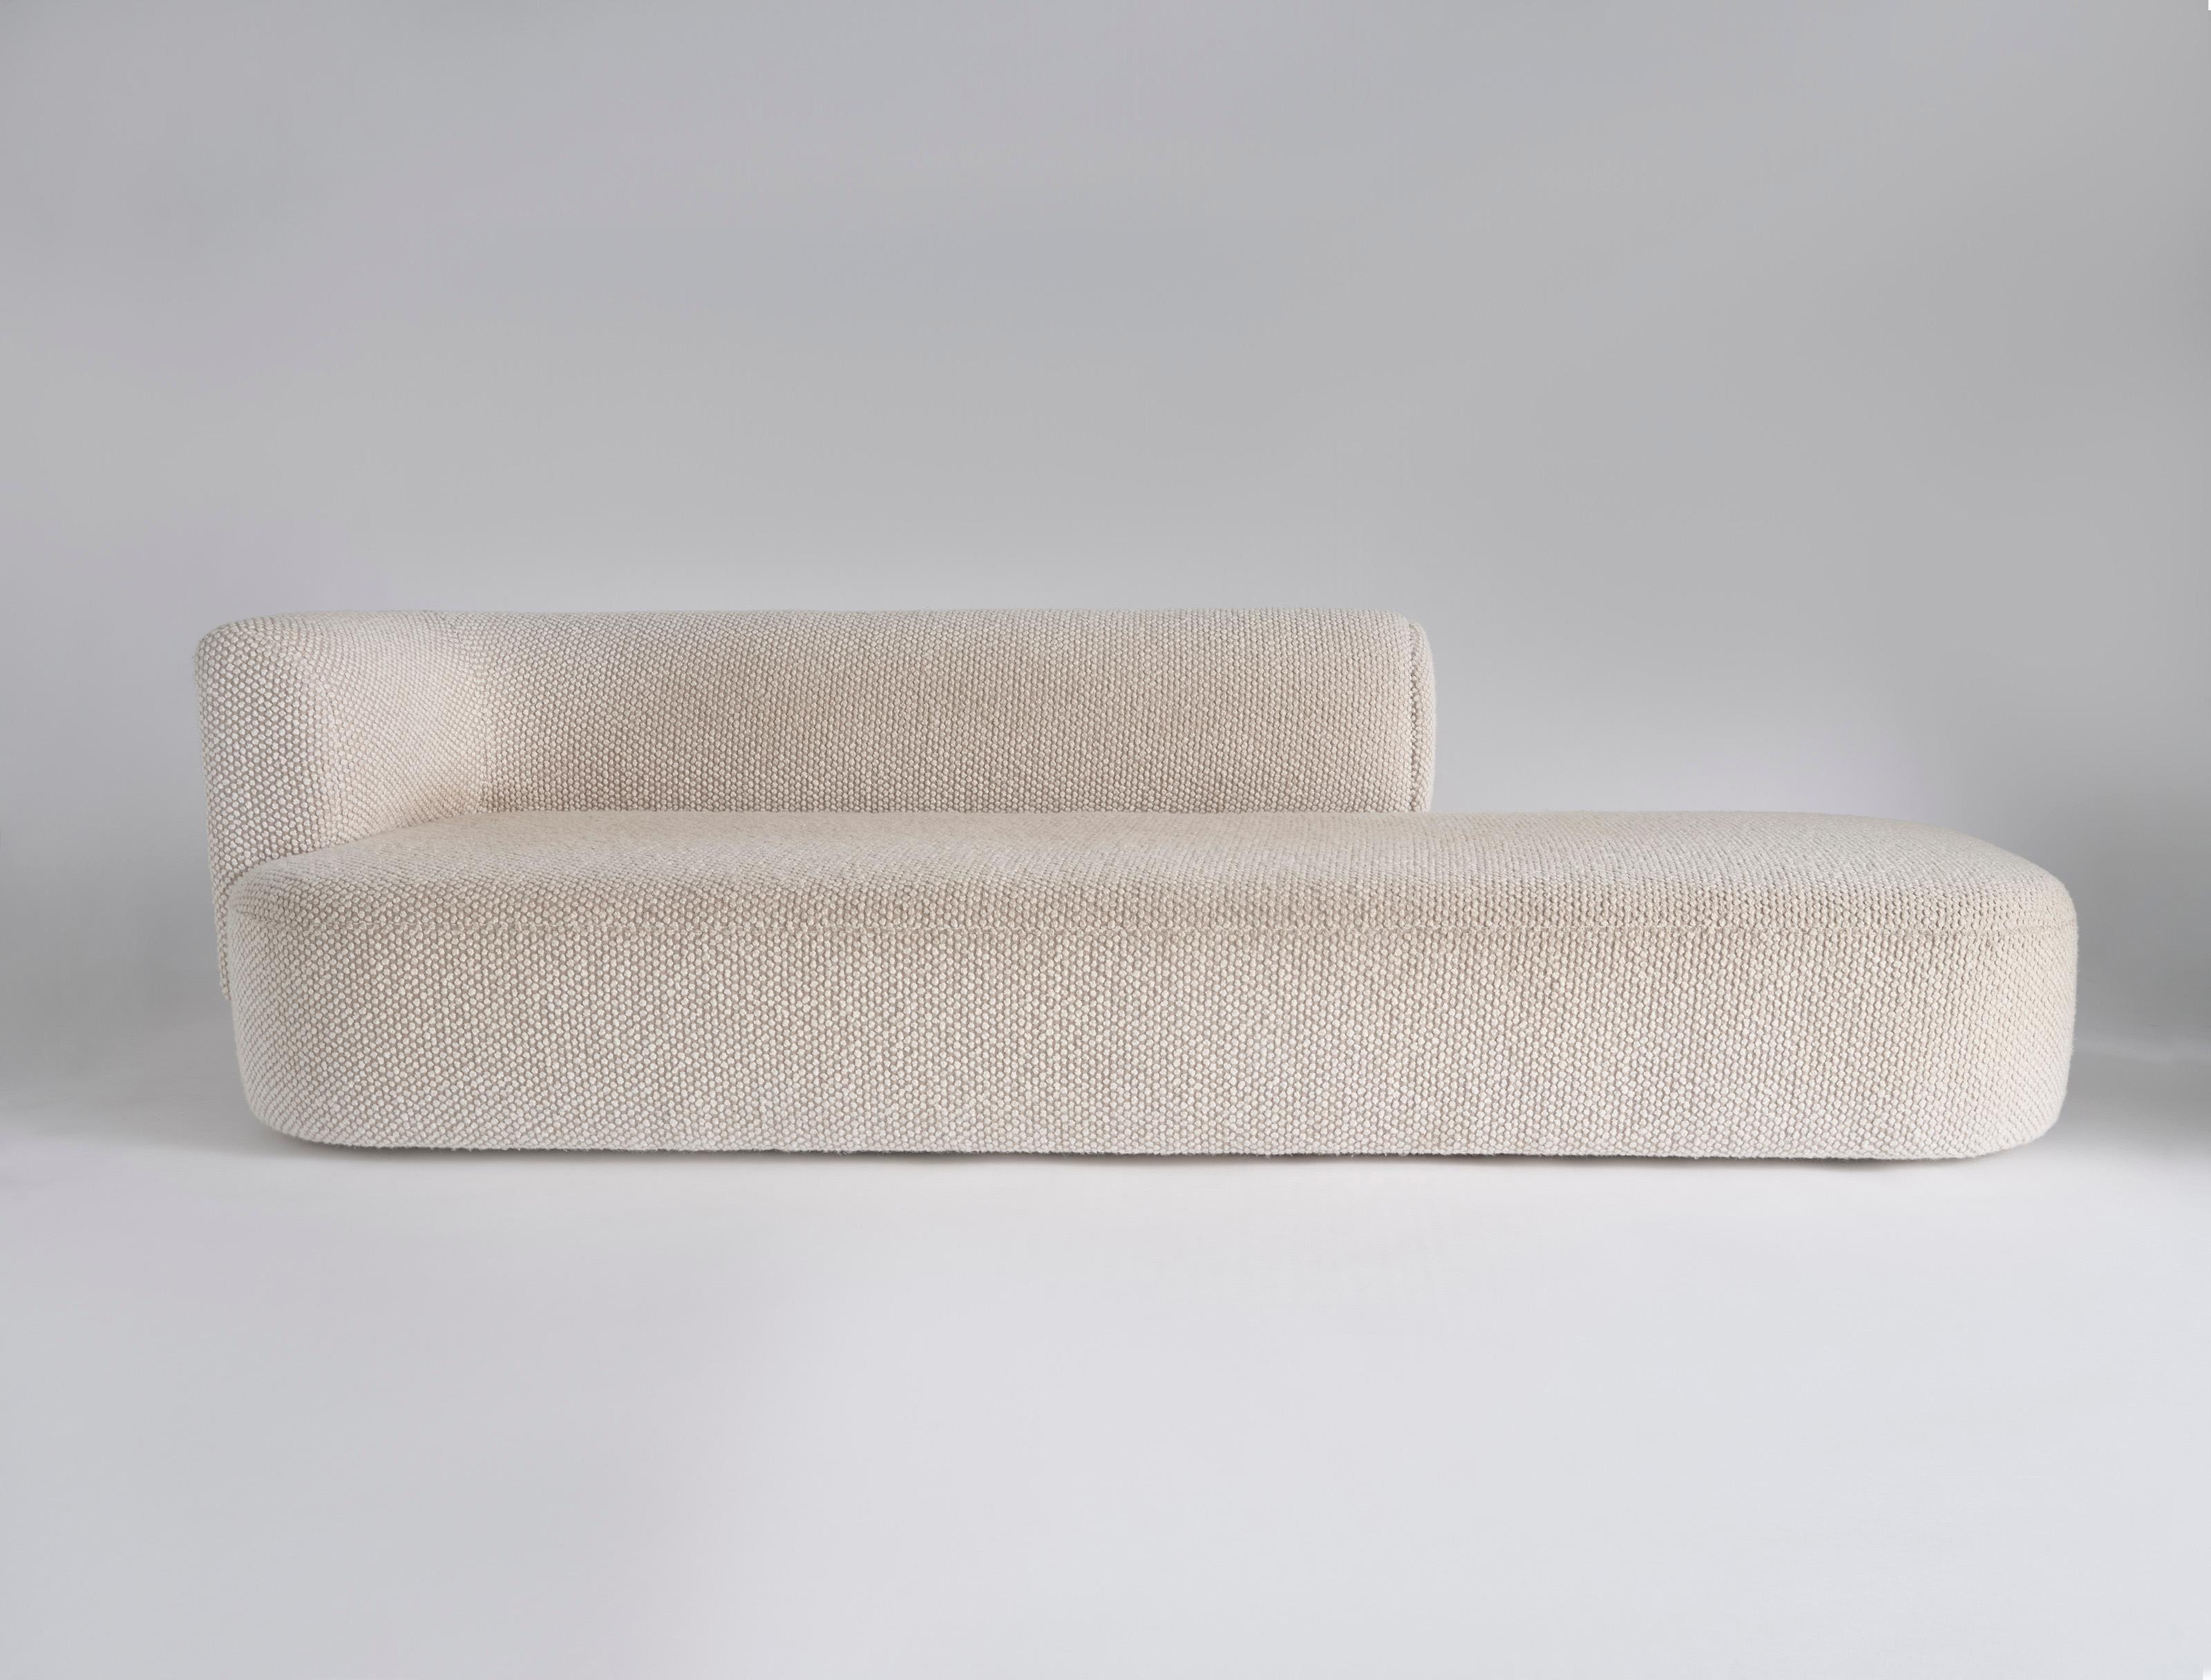 Capper Large Chaise Longue by Phase Design
Dimensions: D 81,3 x W 218,4 x H 61 cm. 
Materials: Upholstery.

Upholstery may be sourced in Customer Own Material (COM), Customer Own Leather (COL), or in Phase Design's suggested fabrics and leathers.